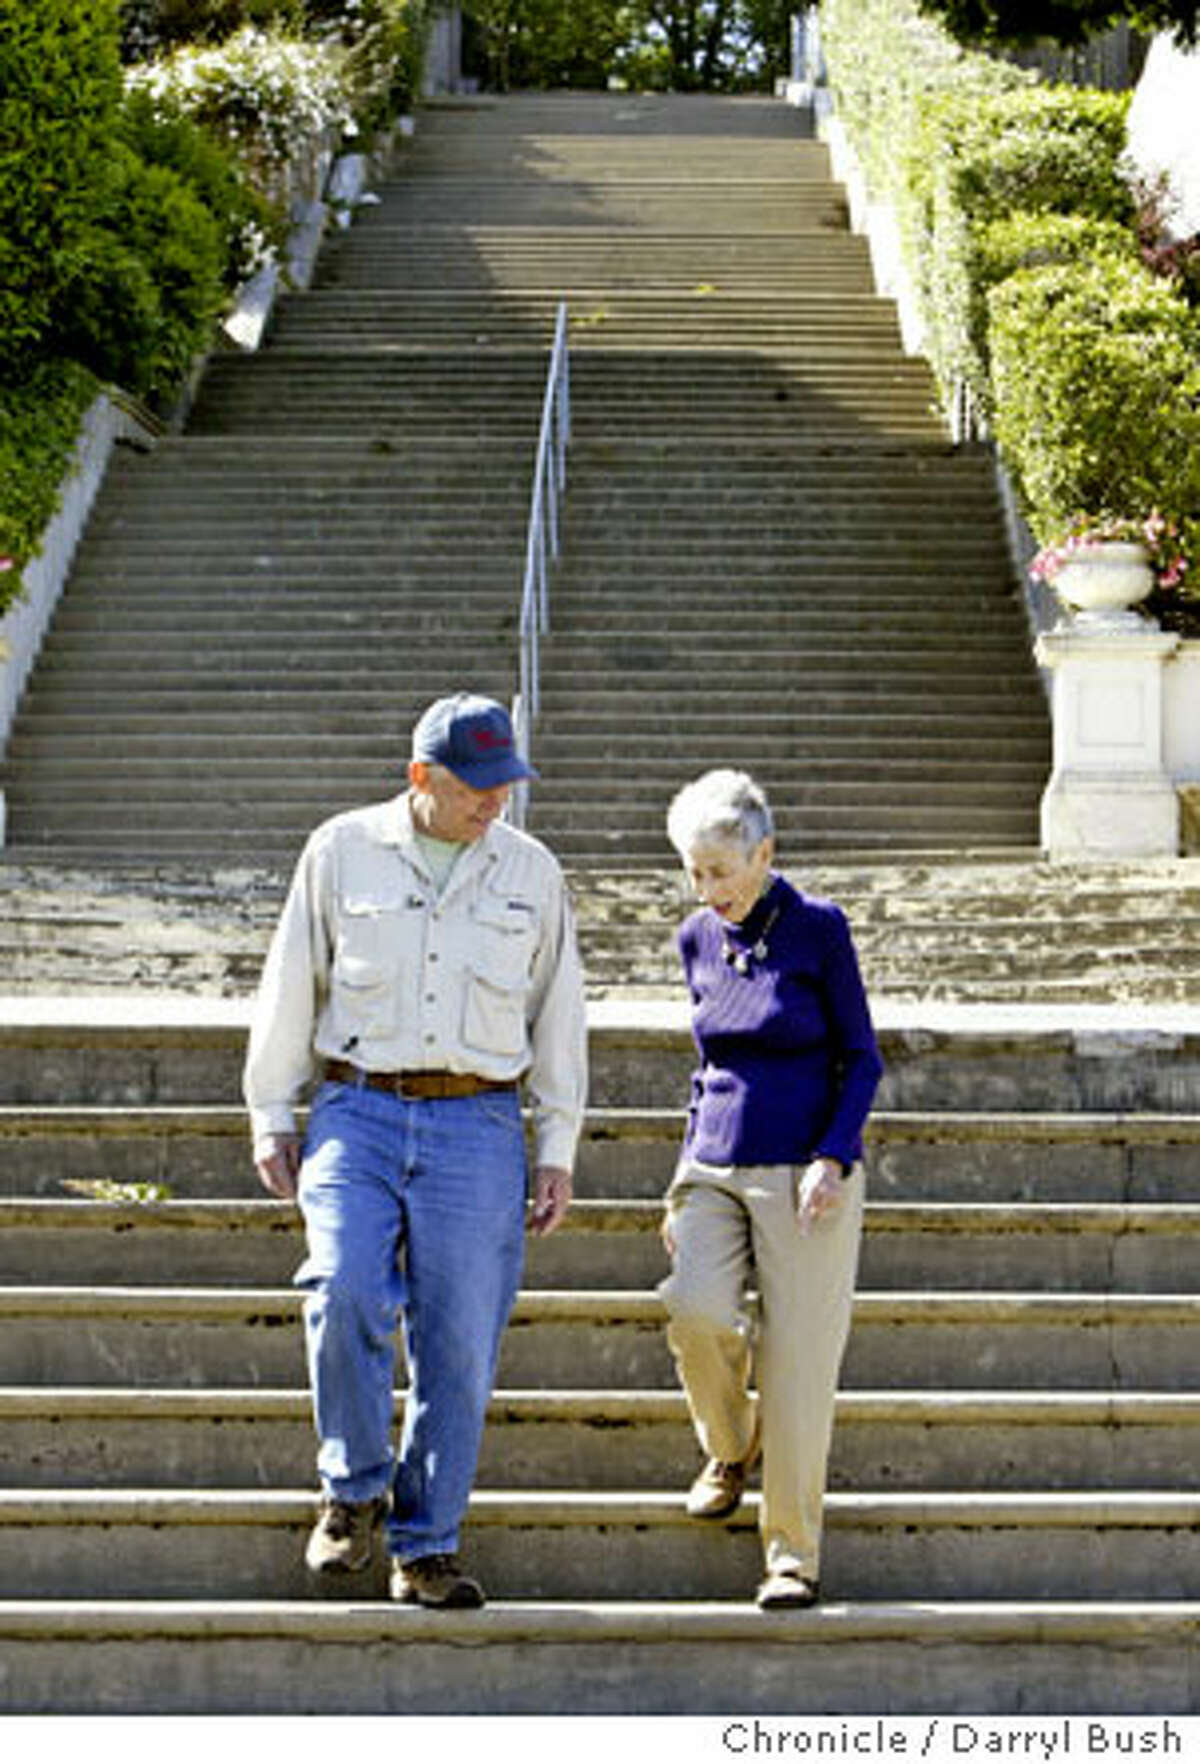 Author Adah Bakalinsky, right, and Charles Brock take in the Pacheco Street steps in Forest Hill. Chronicle photo by Darryl Bush